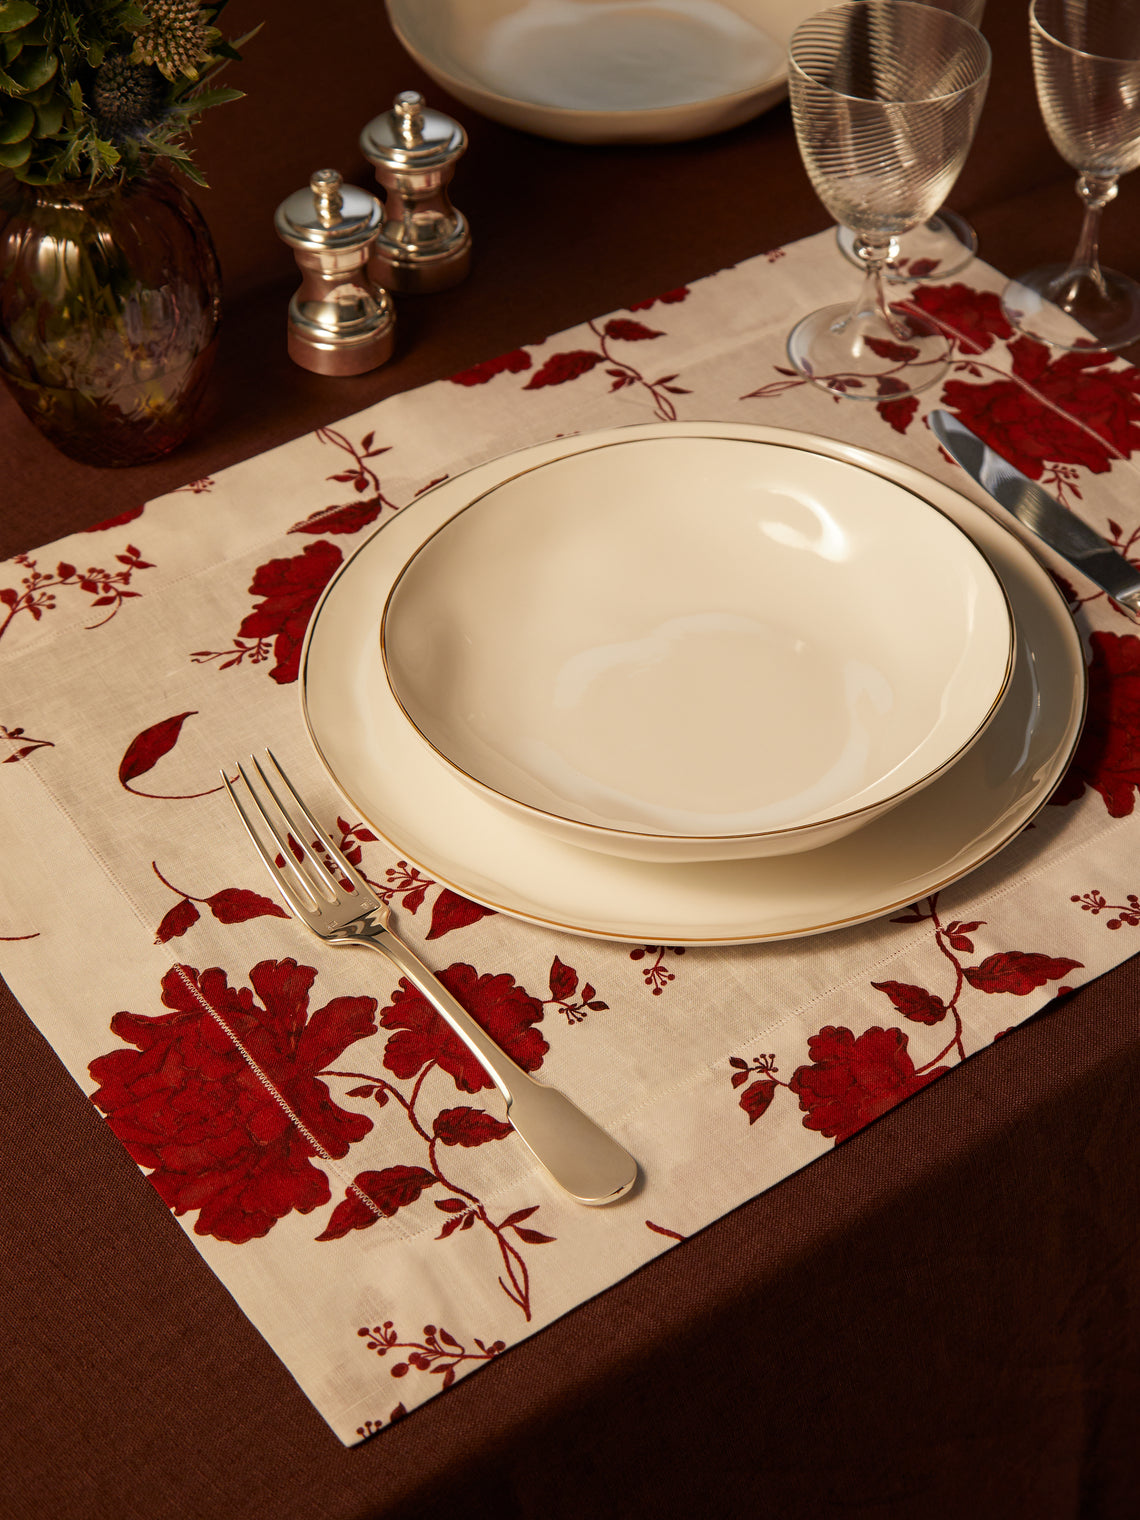 Emilia Wickstead - Floral Linen Placemats (Set of 4) - Red - ABASK